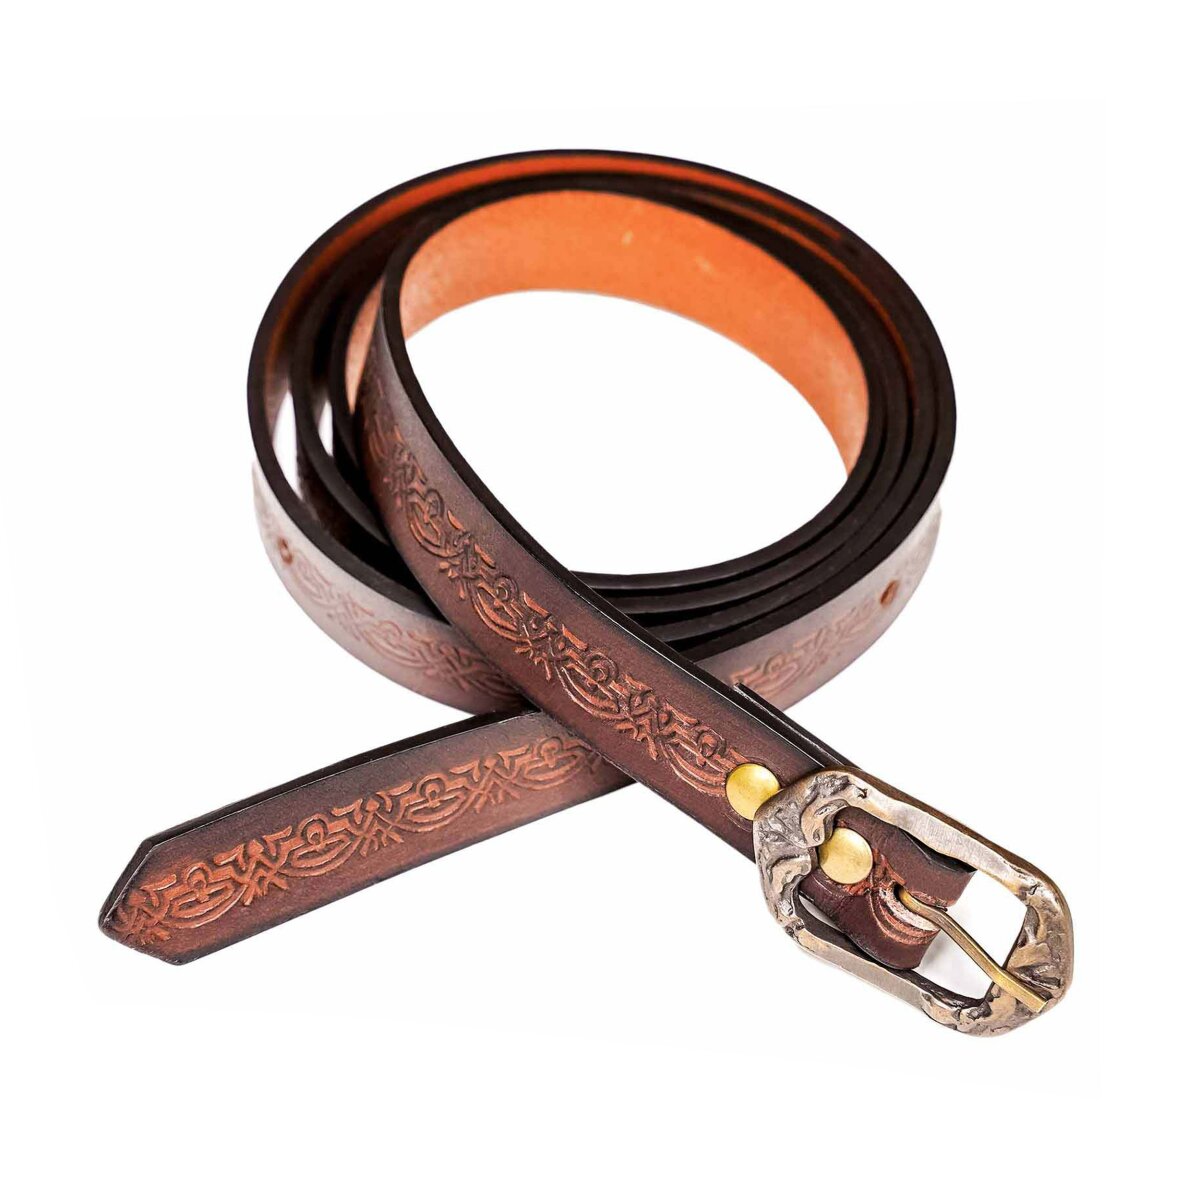 Handcrafted Genuine Leather Belt with Embossed Fantasy...